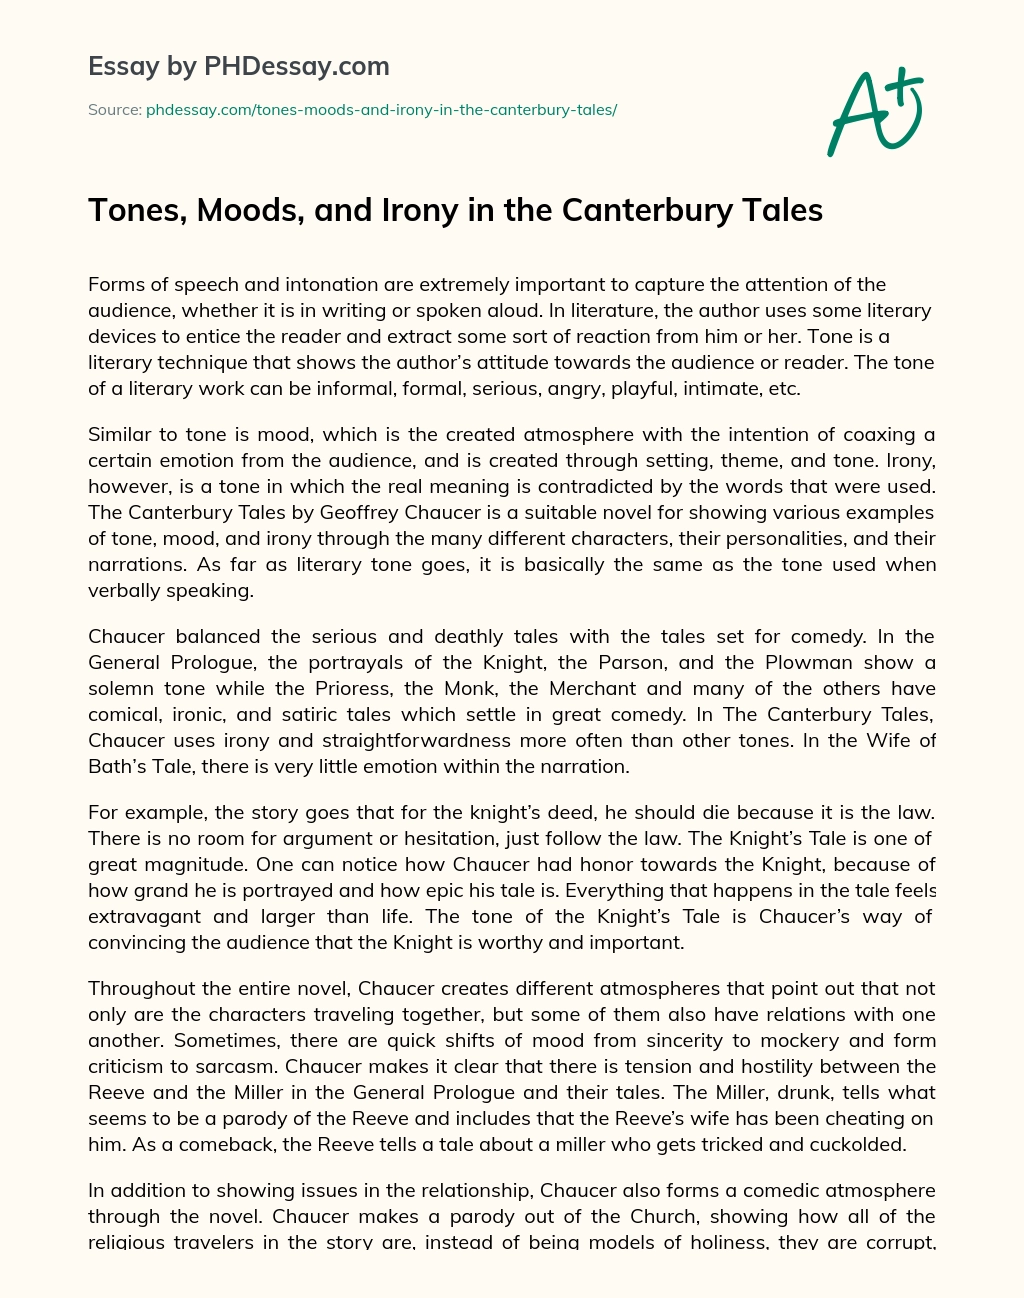 Tones, Moods, and Irony in the Canterbury Tales essay